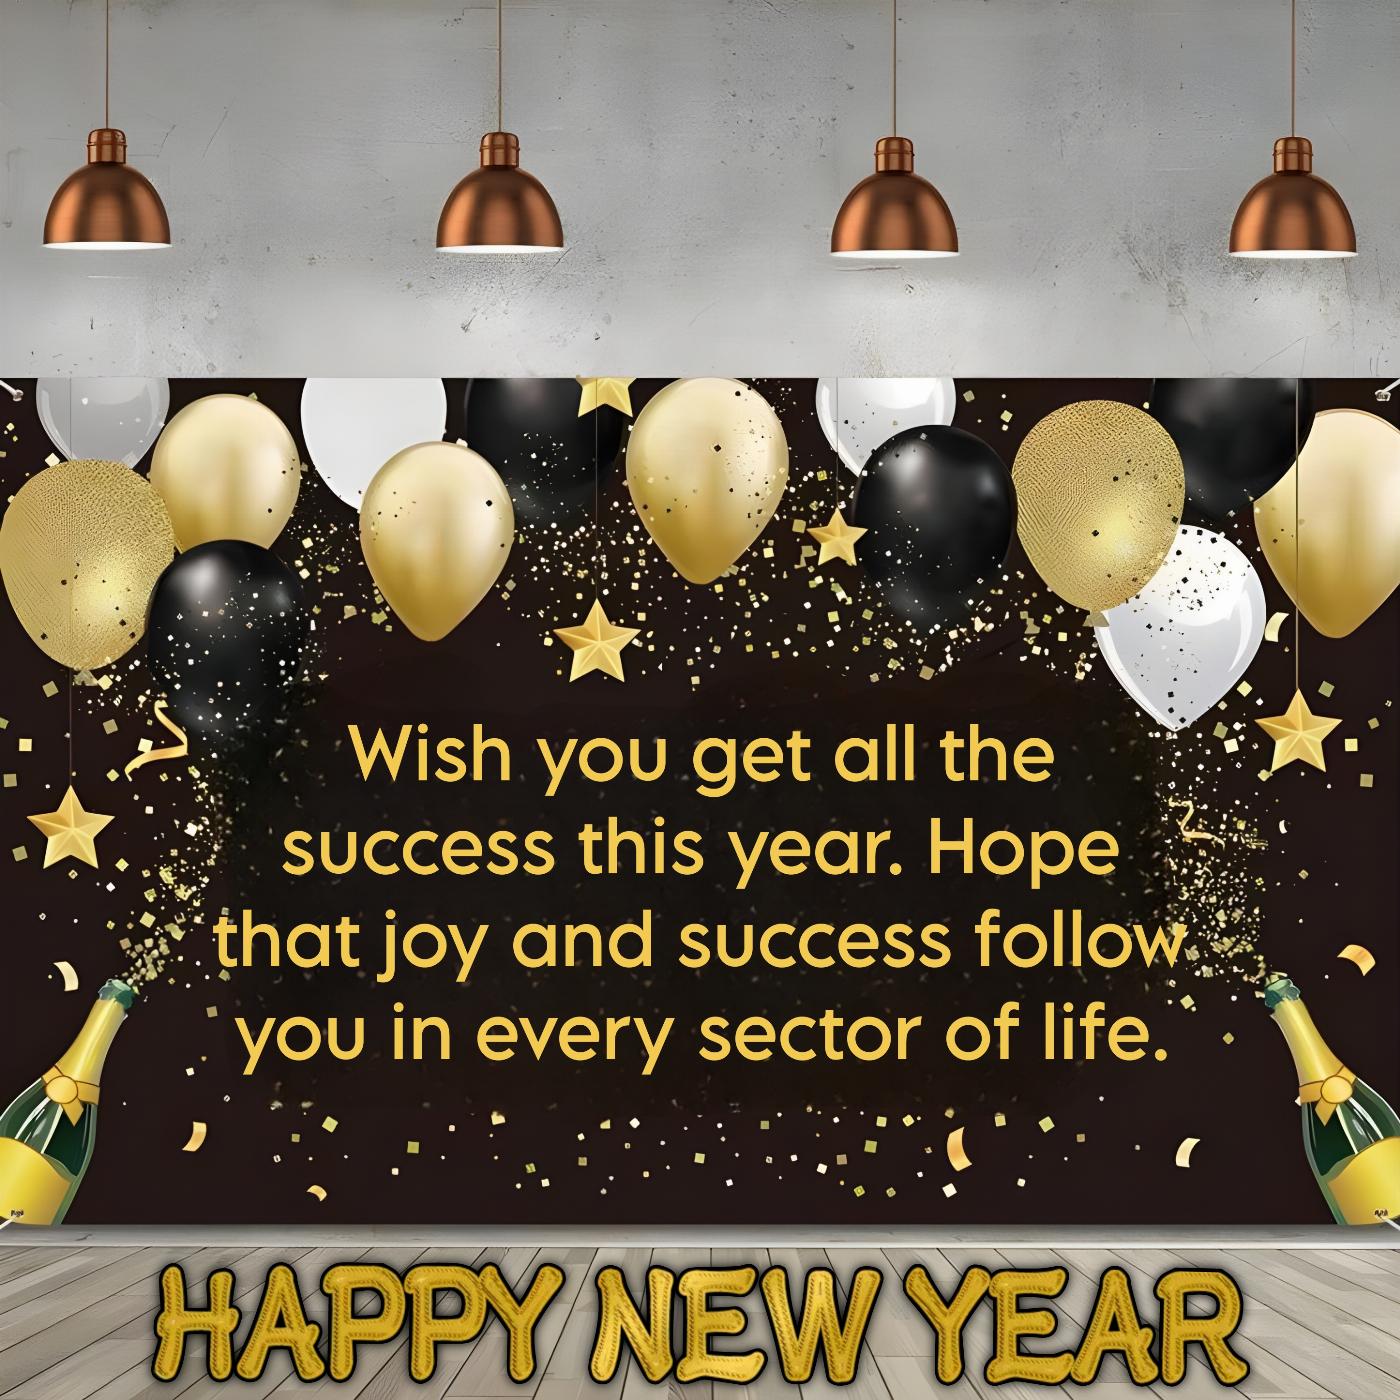 Wish you get all the success this year